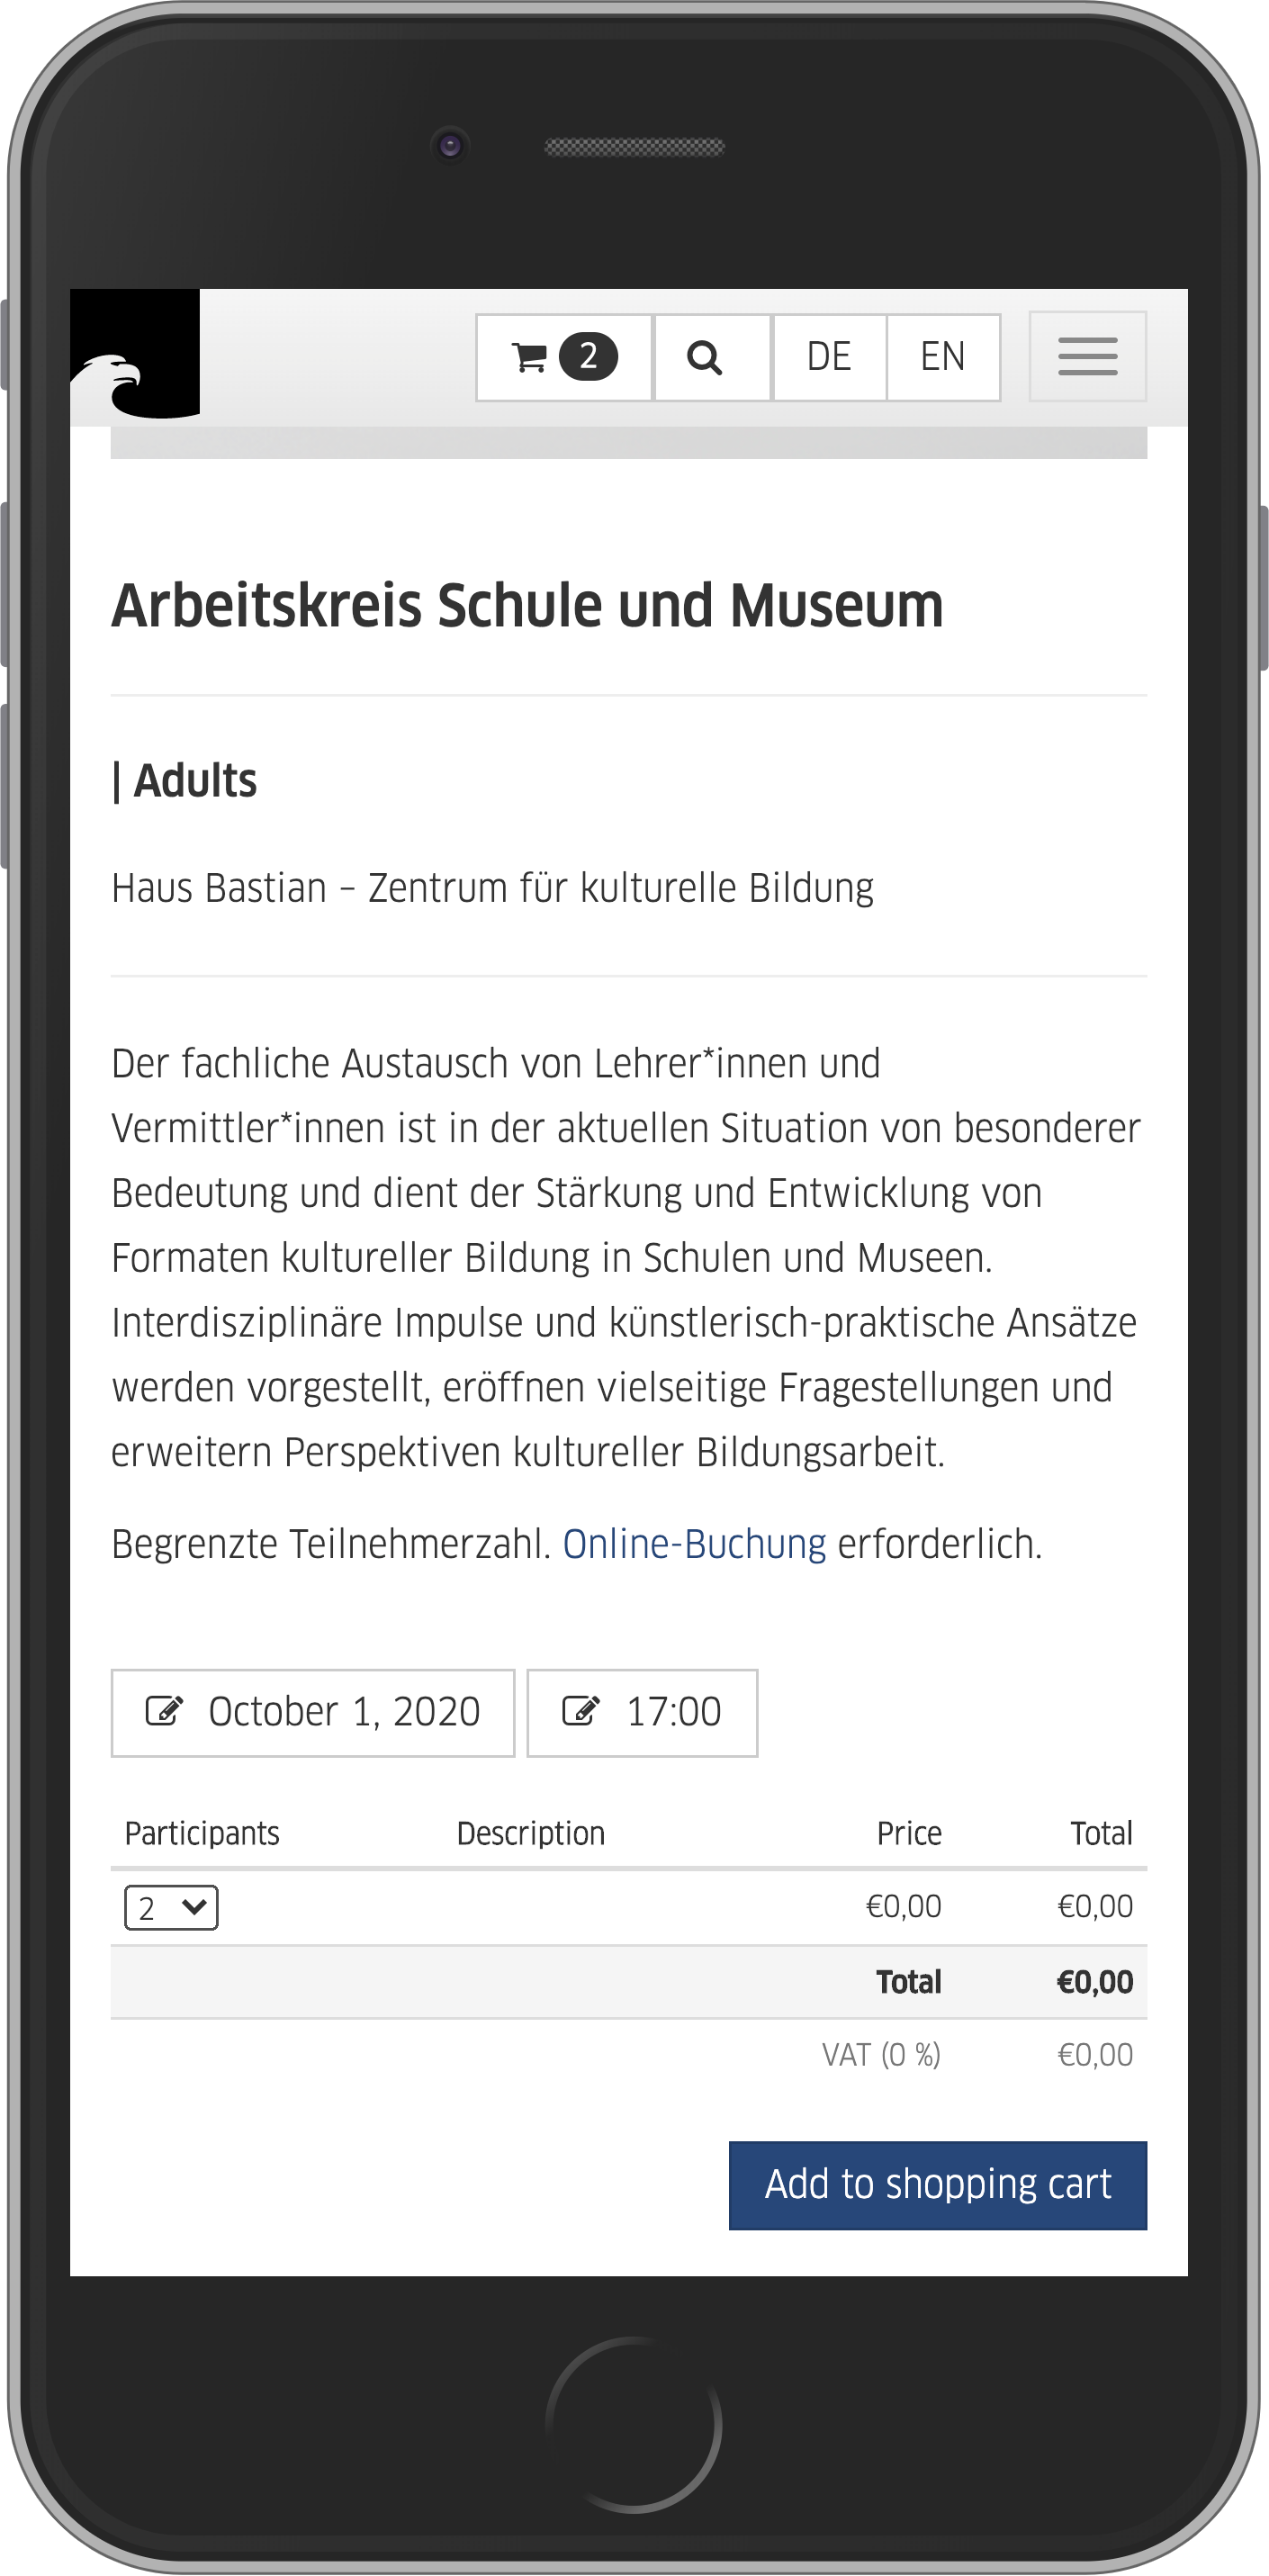 Mobile view of event details and seat/ticket selection in event booking process in online shop of Staatliche Museen zu Berlin (Berlin State Museums)